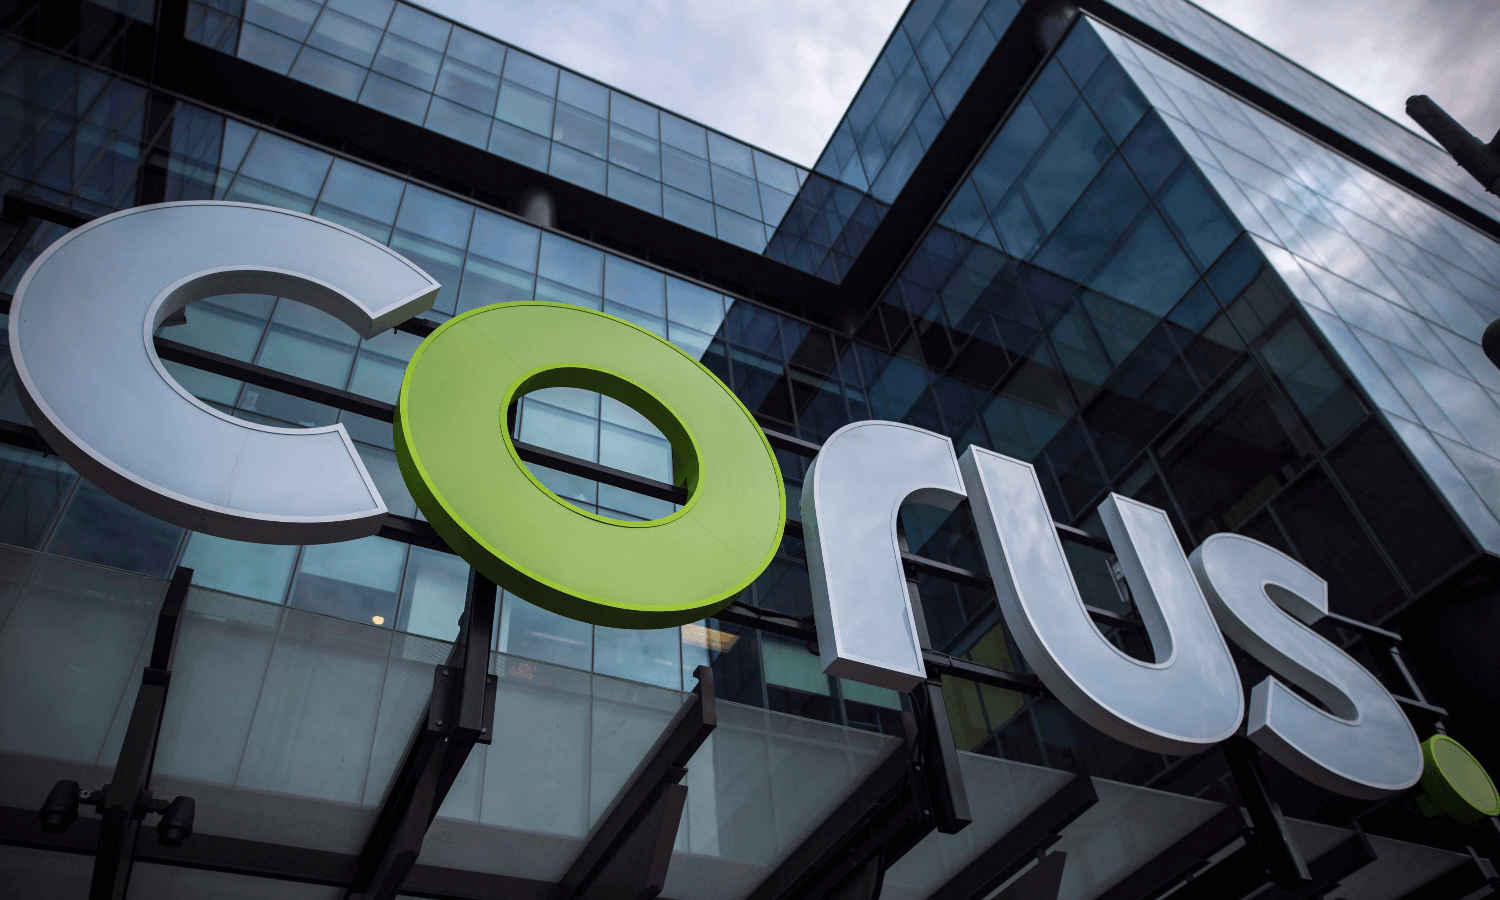 Corus Entertainment announces further layoffs to help cut costs – MoneySense